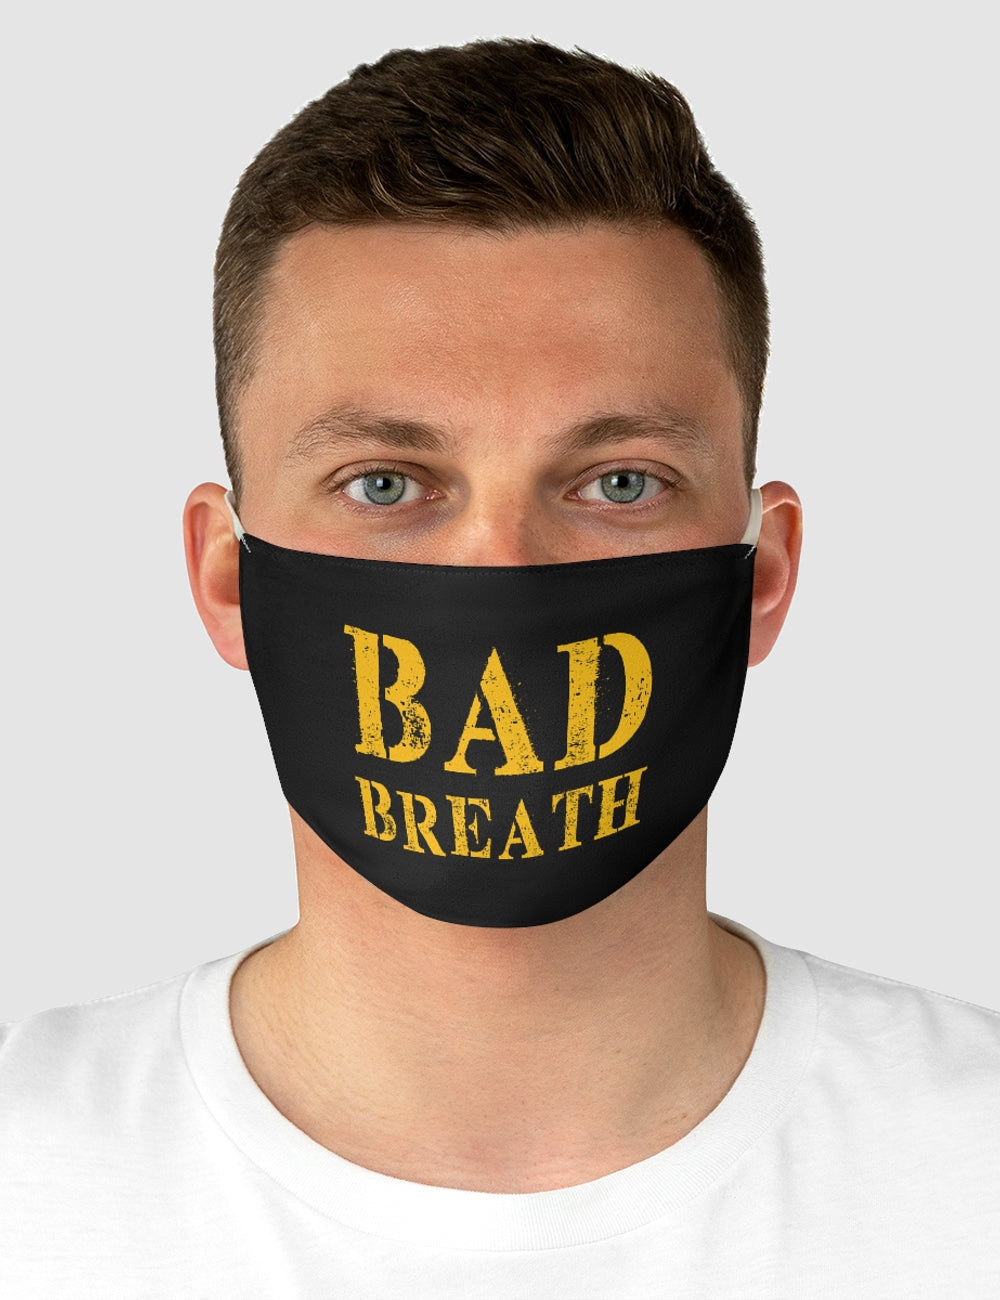 Bad Breath | Two-Layer Polyester Fabric Face Mask OniTakai